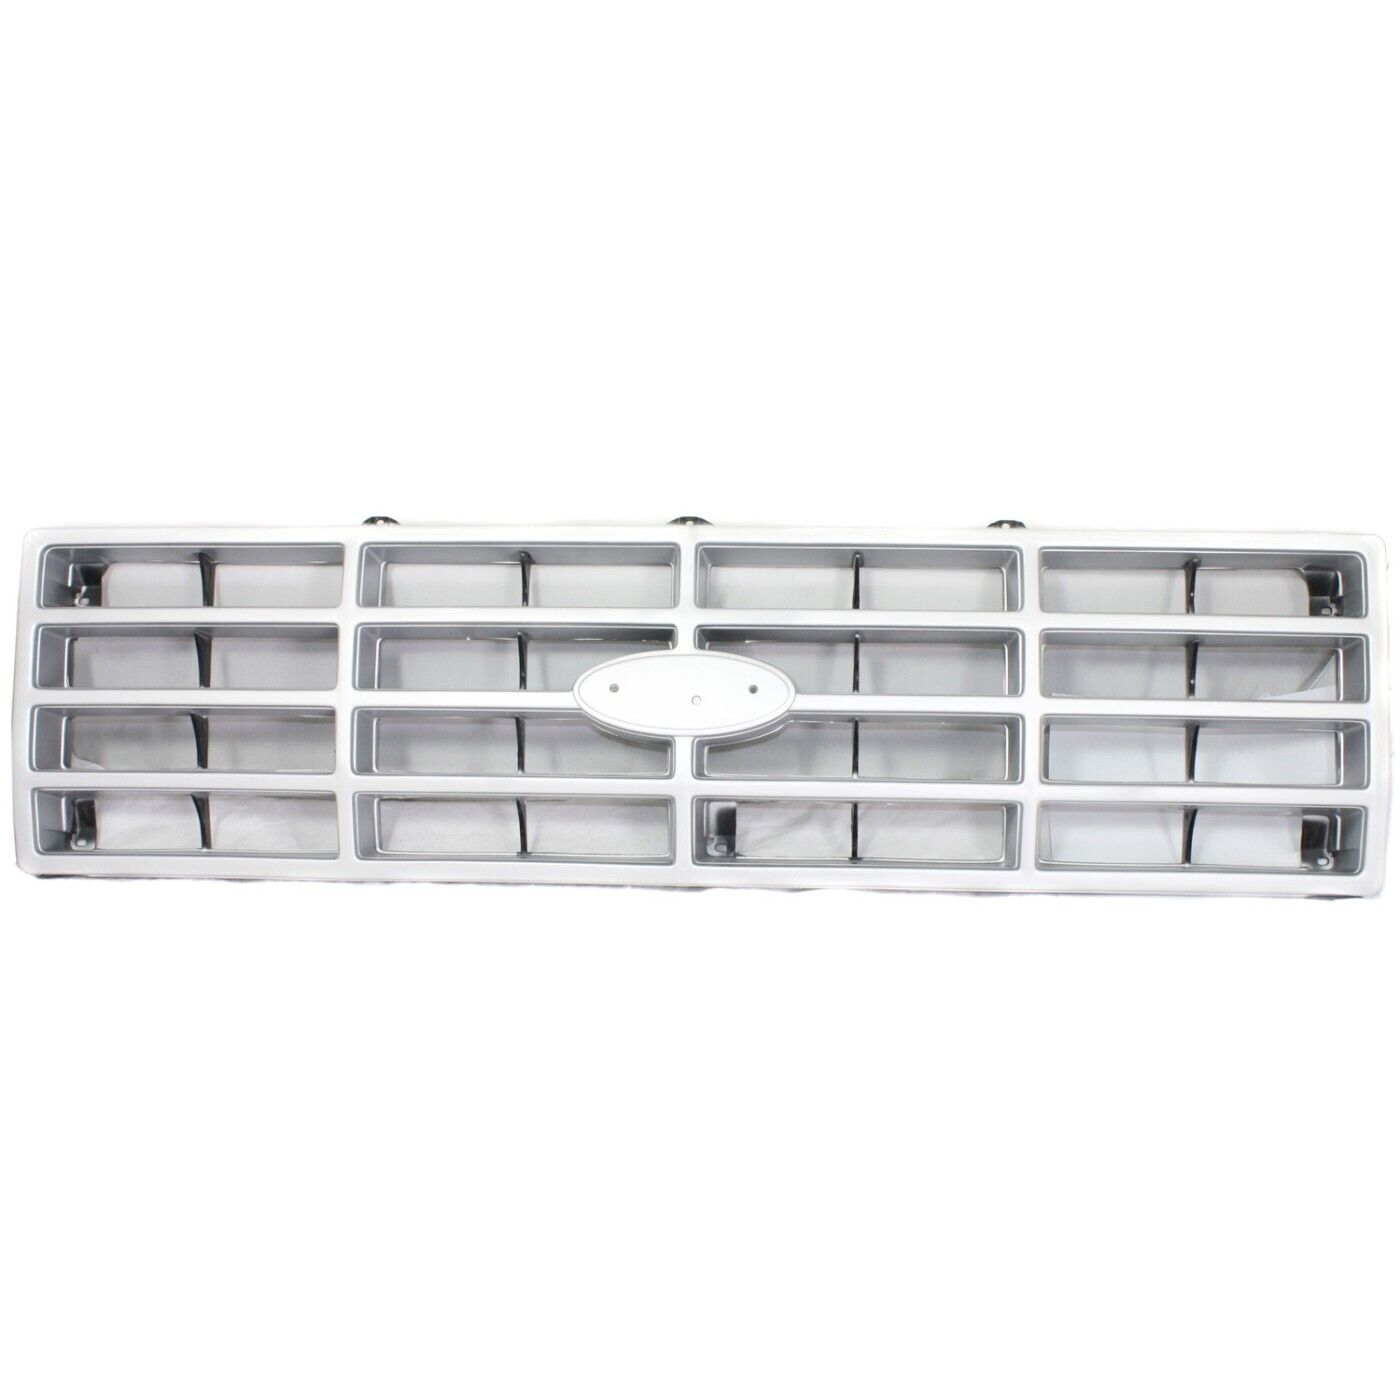 Grille For 82-86 Ford F-150 F-250 Silver Shell w/ Black Insert Plastic